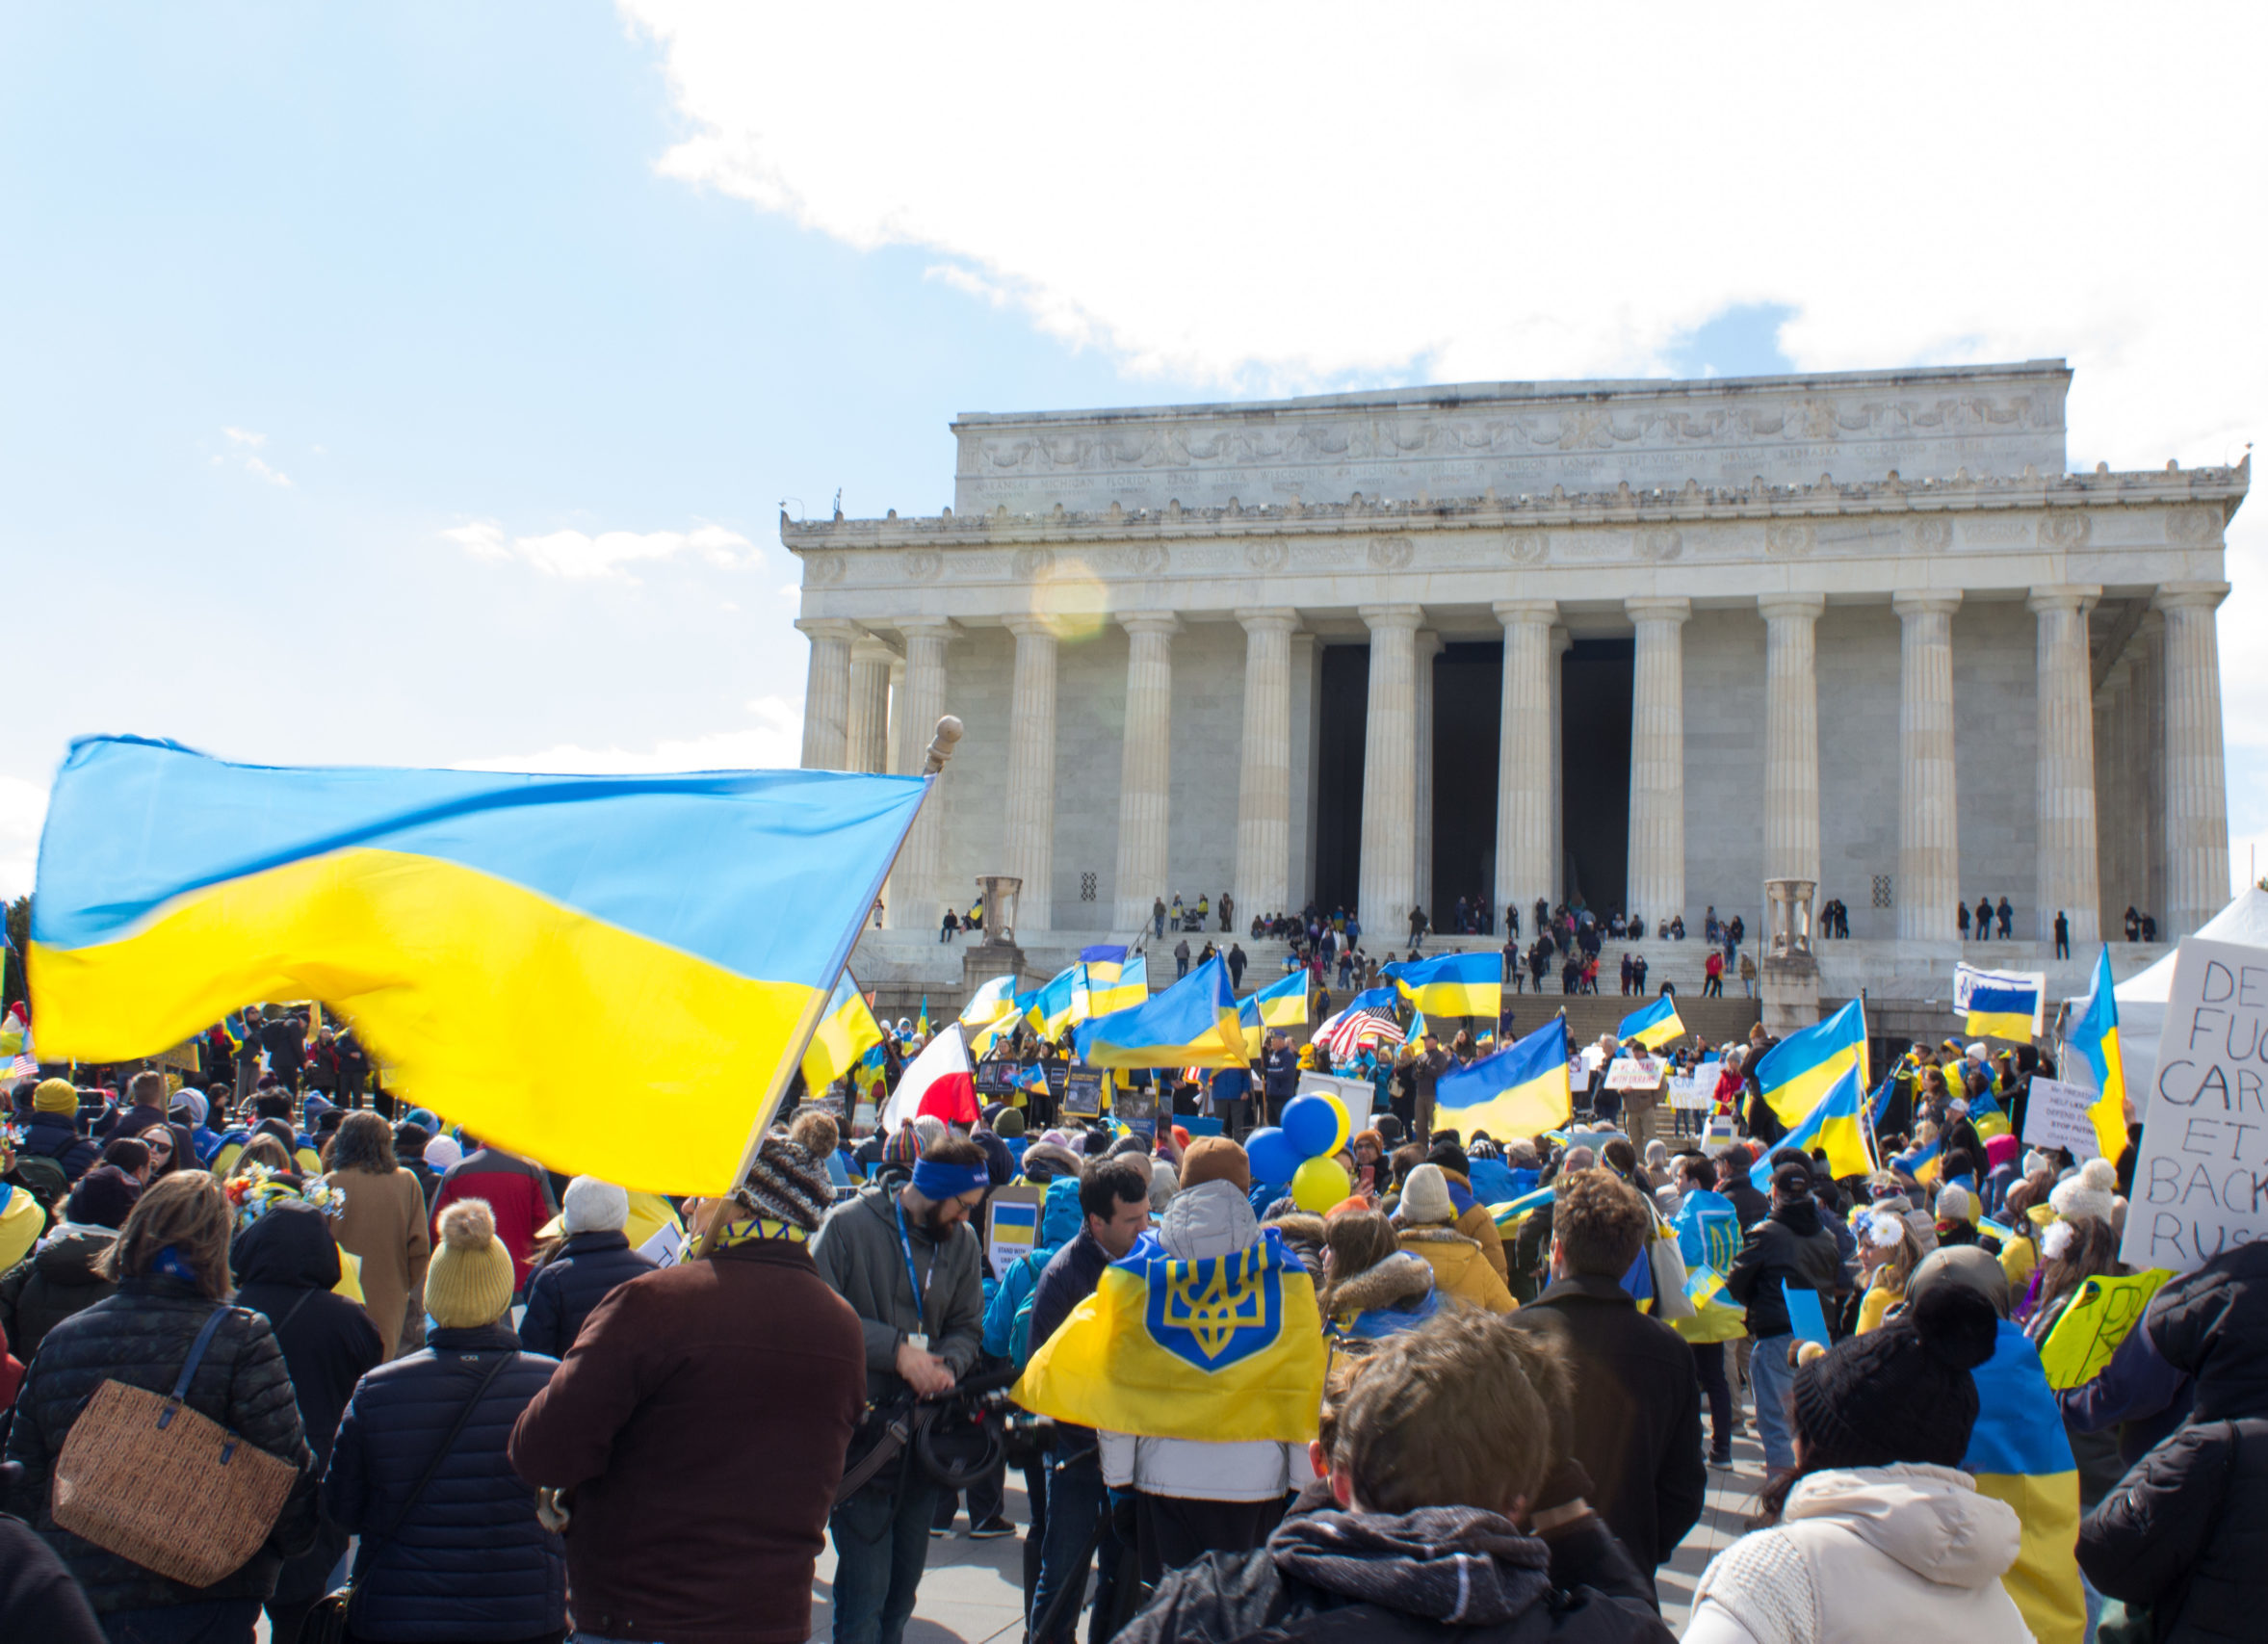 Demonstrators hold Ukrainian flags and signs in front of the Lincoln memorial, Washington DC